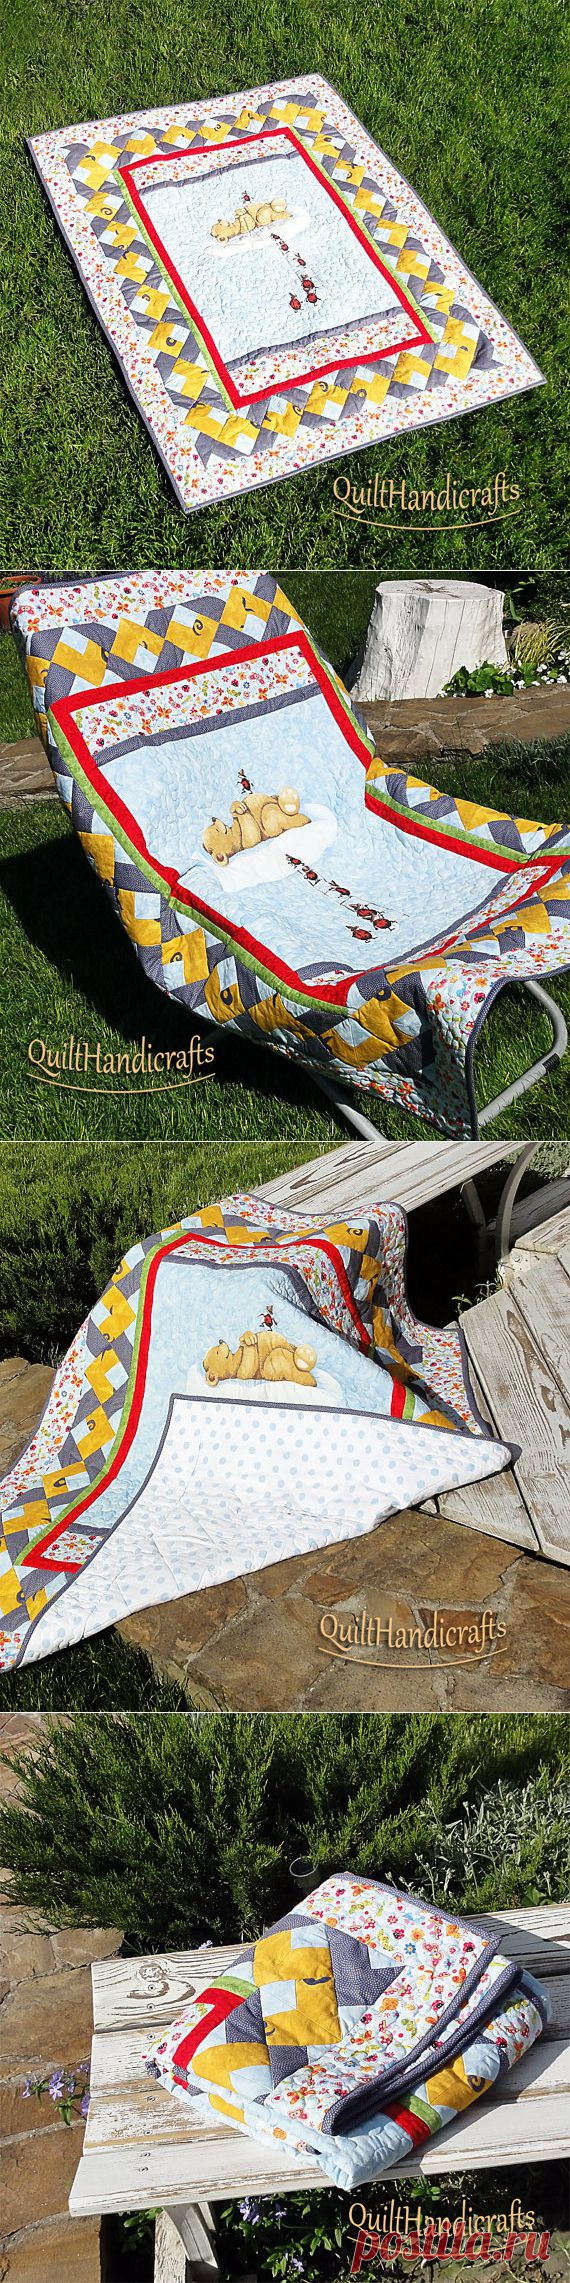 Beautiful handmade baby quilt. Quilt is sewn by QuiltHandicrafts